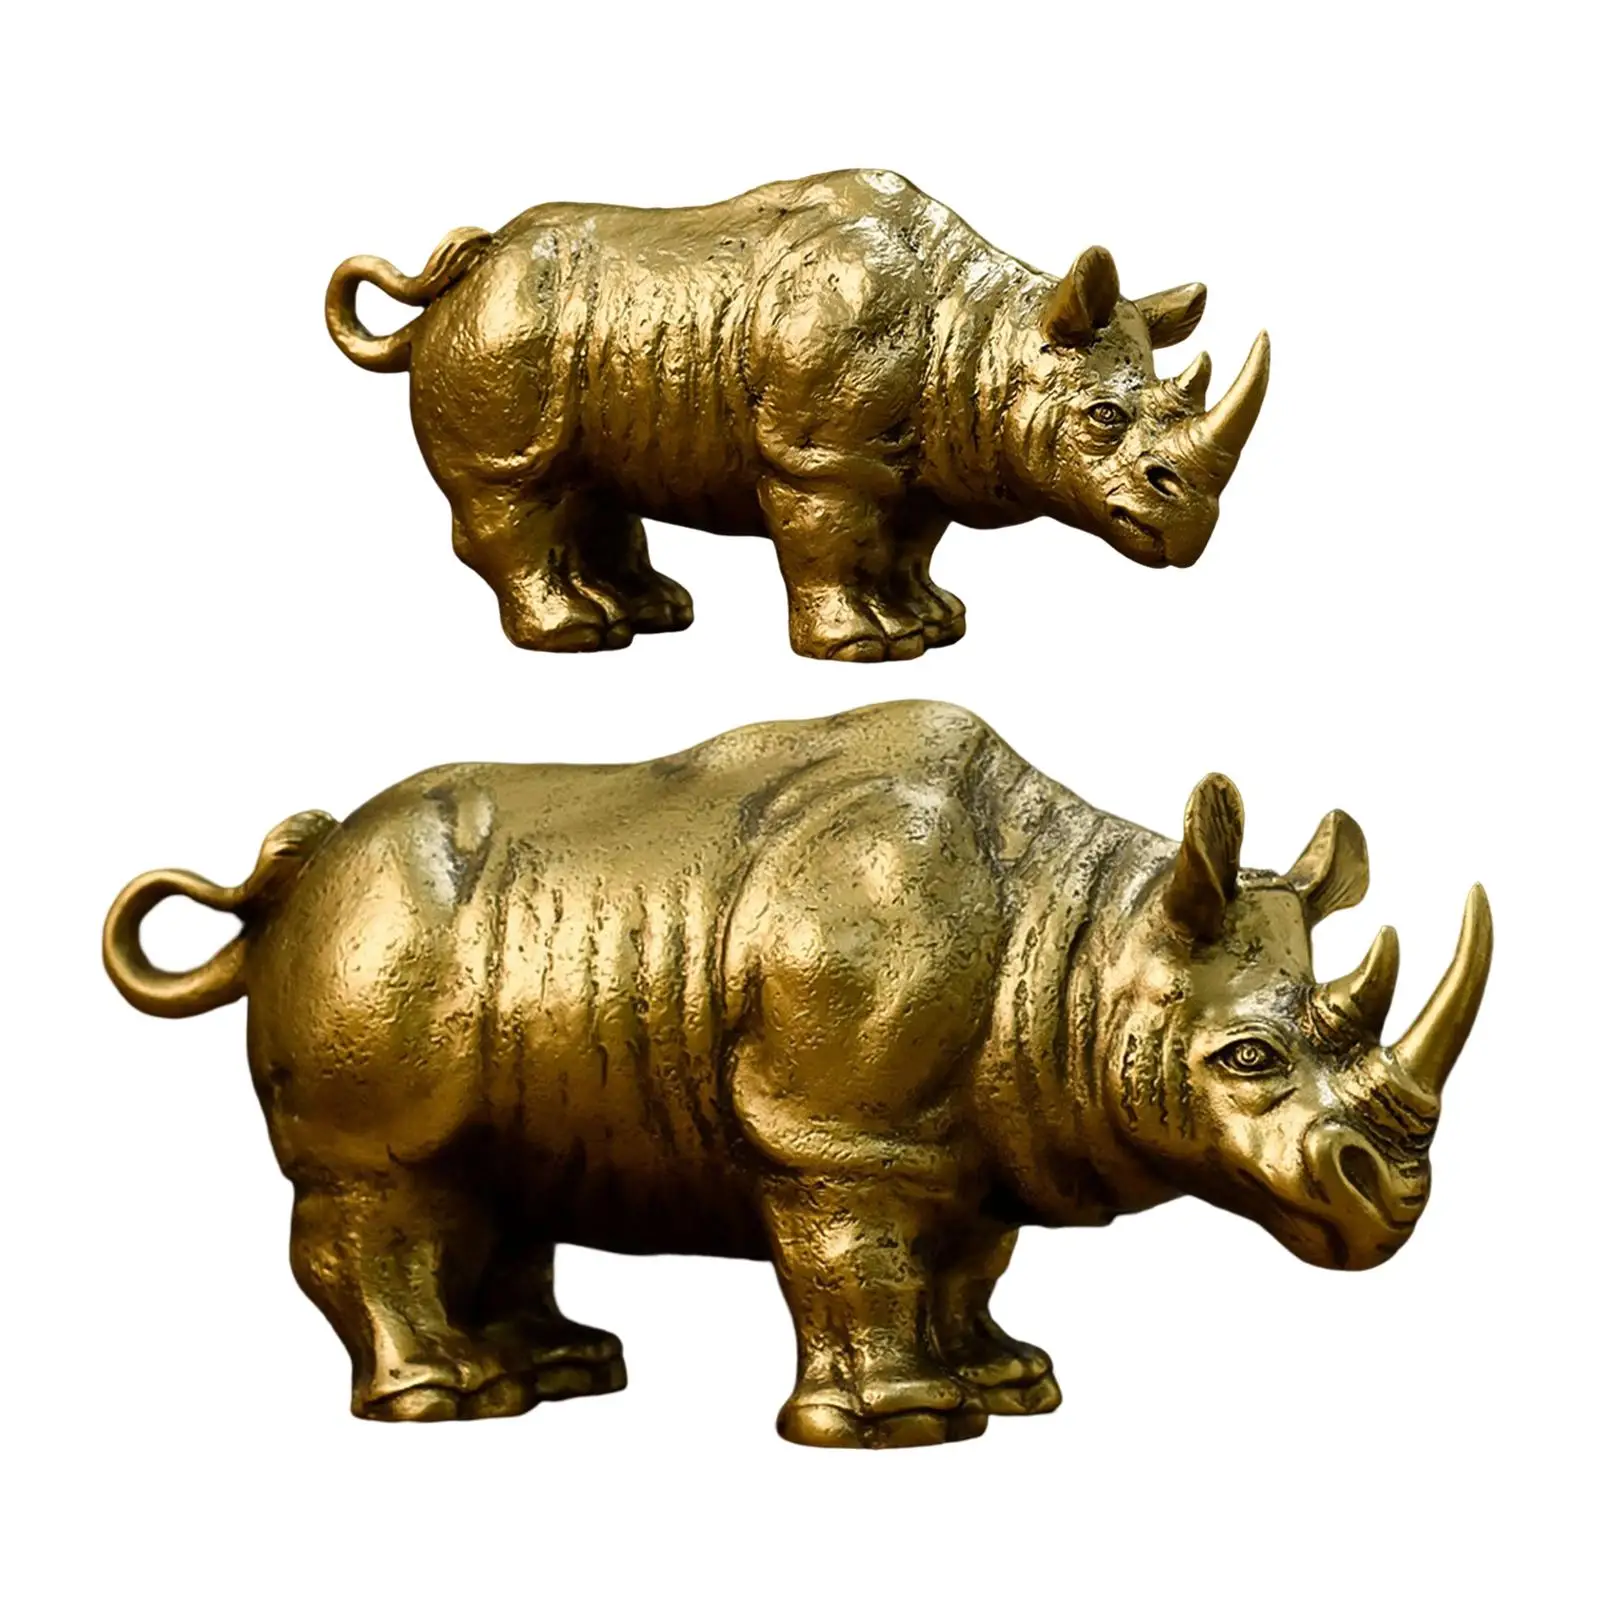 Resin Rhino Statue Collection Crafts Animal Sculpture Animal Figurines for Office Cabinet Home Decor Ornament